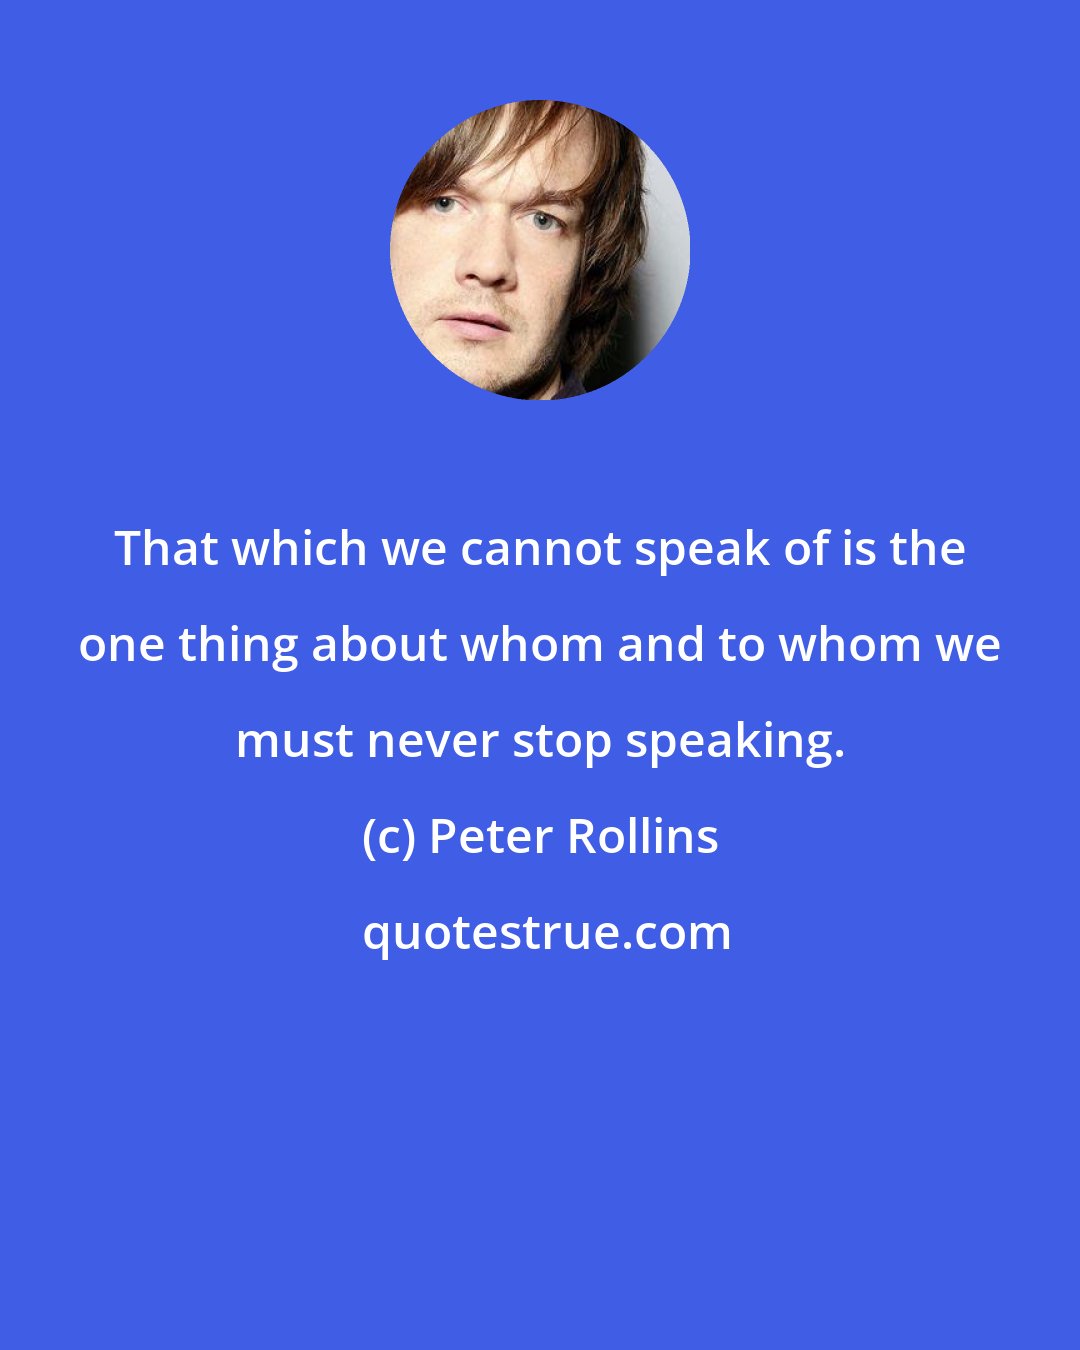 Peter Rollins: That which we cannot speak of is the one thing about whom and to whom we must never stop speaking.